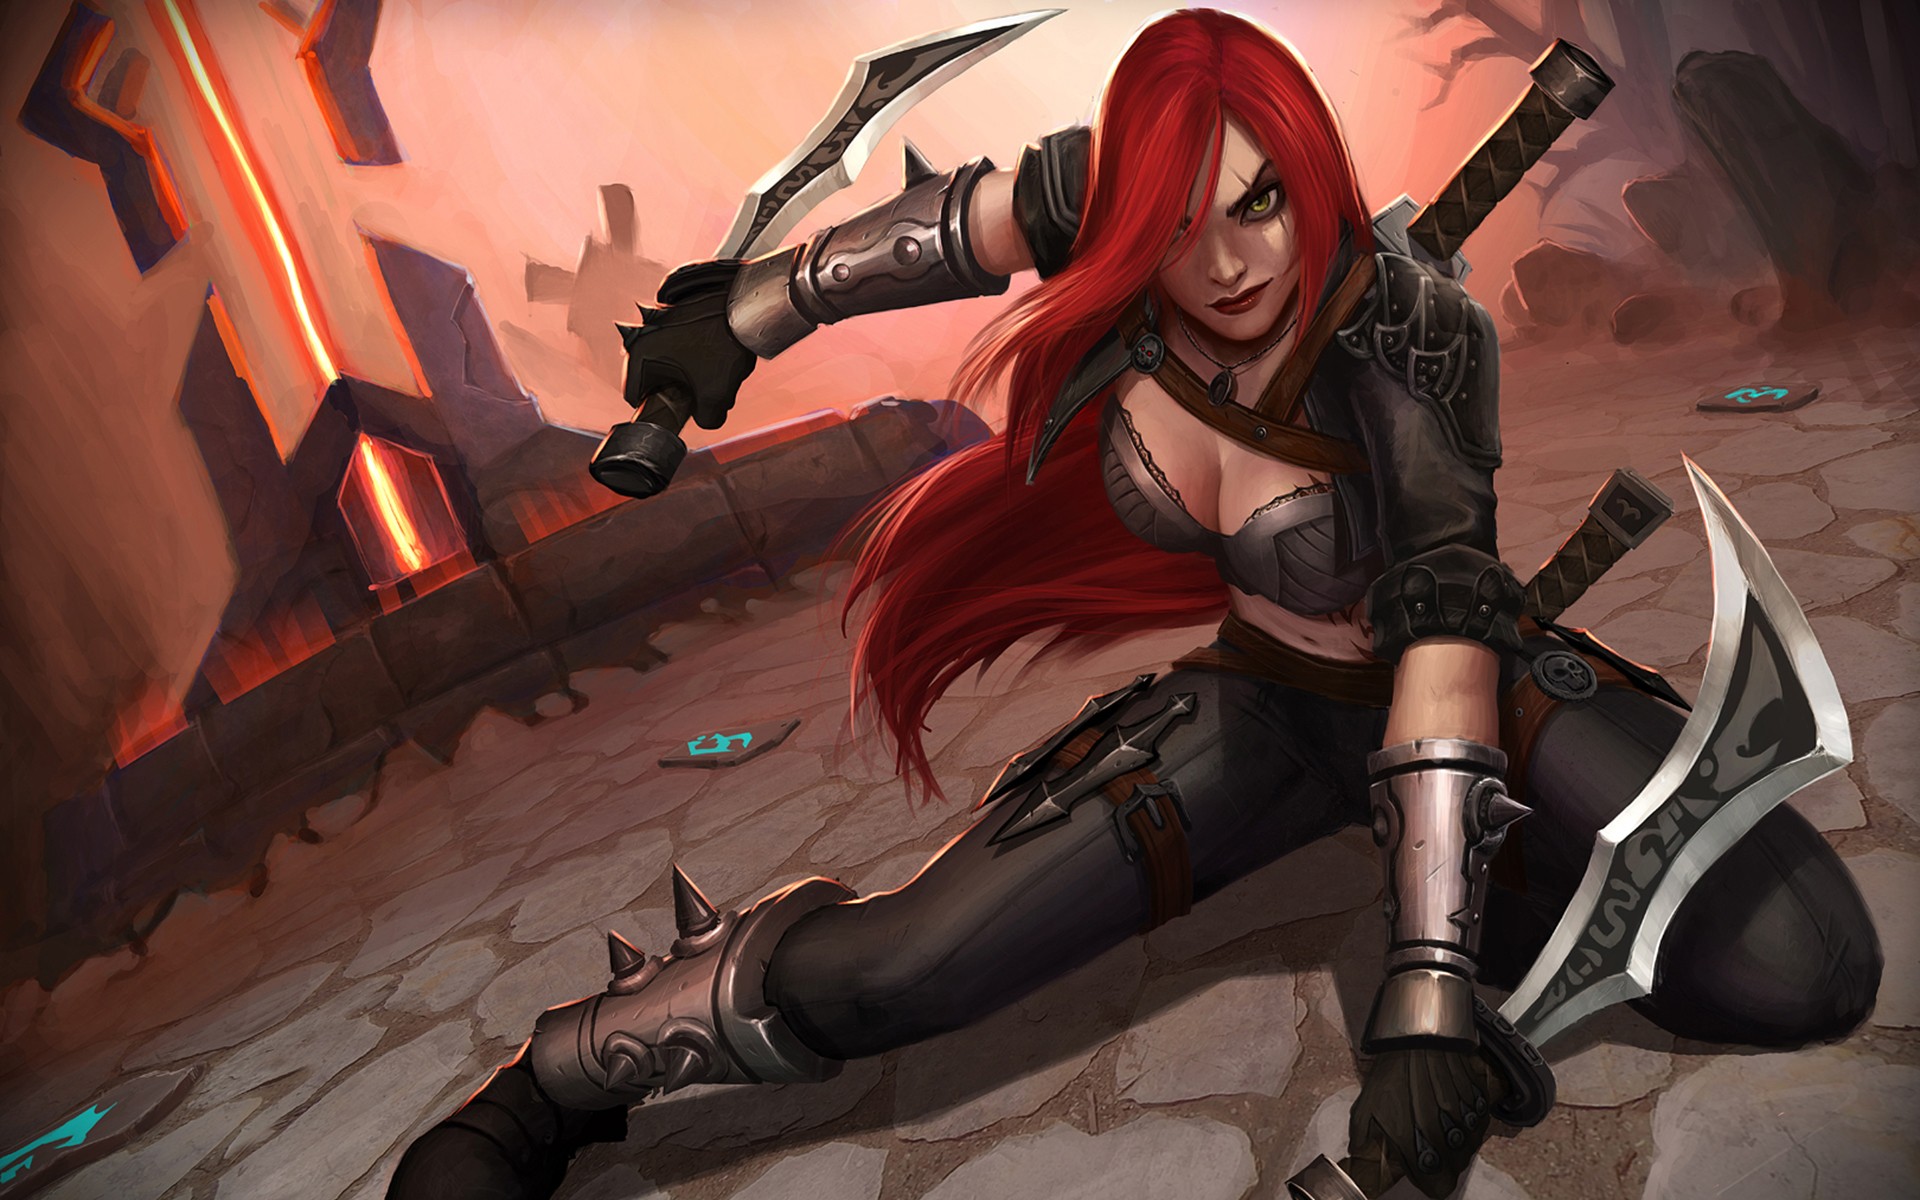 Anime 1920x1200 League of Legends Noxus Katarina (League of Legends) PC gaming video game art video game girls redhead long hair boobs cleavage women with swords looking at viewer women fantasy art fantasy girl